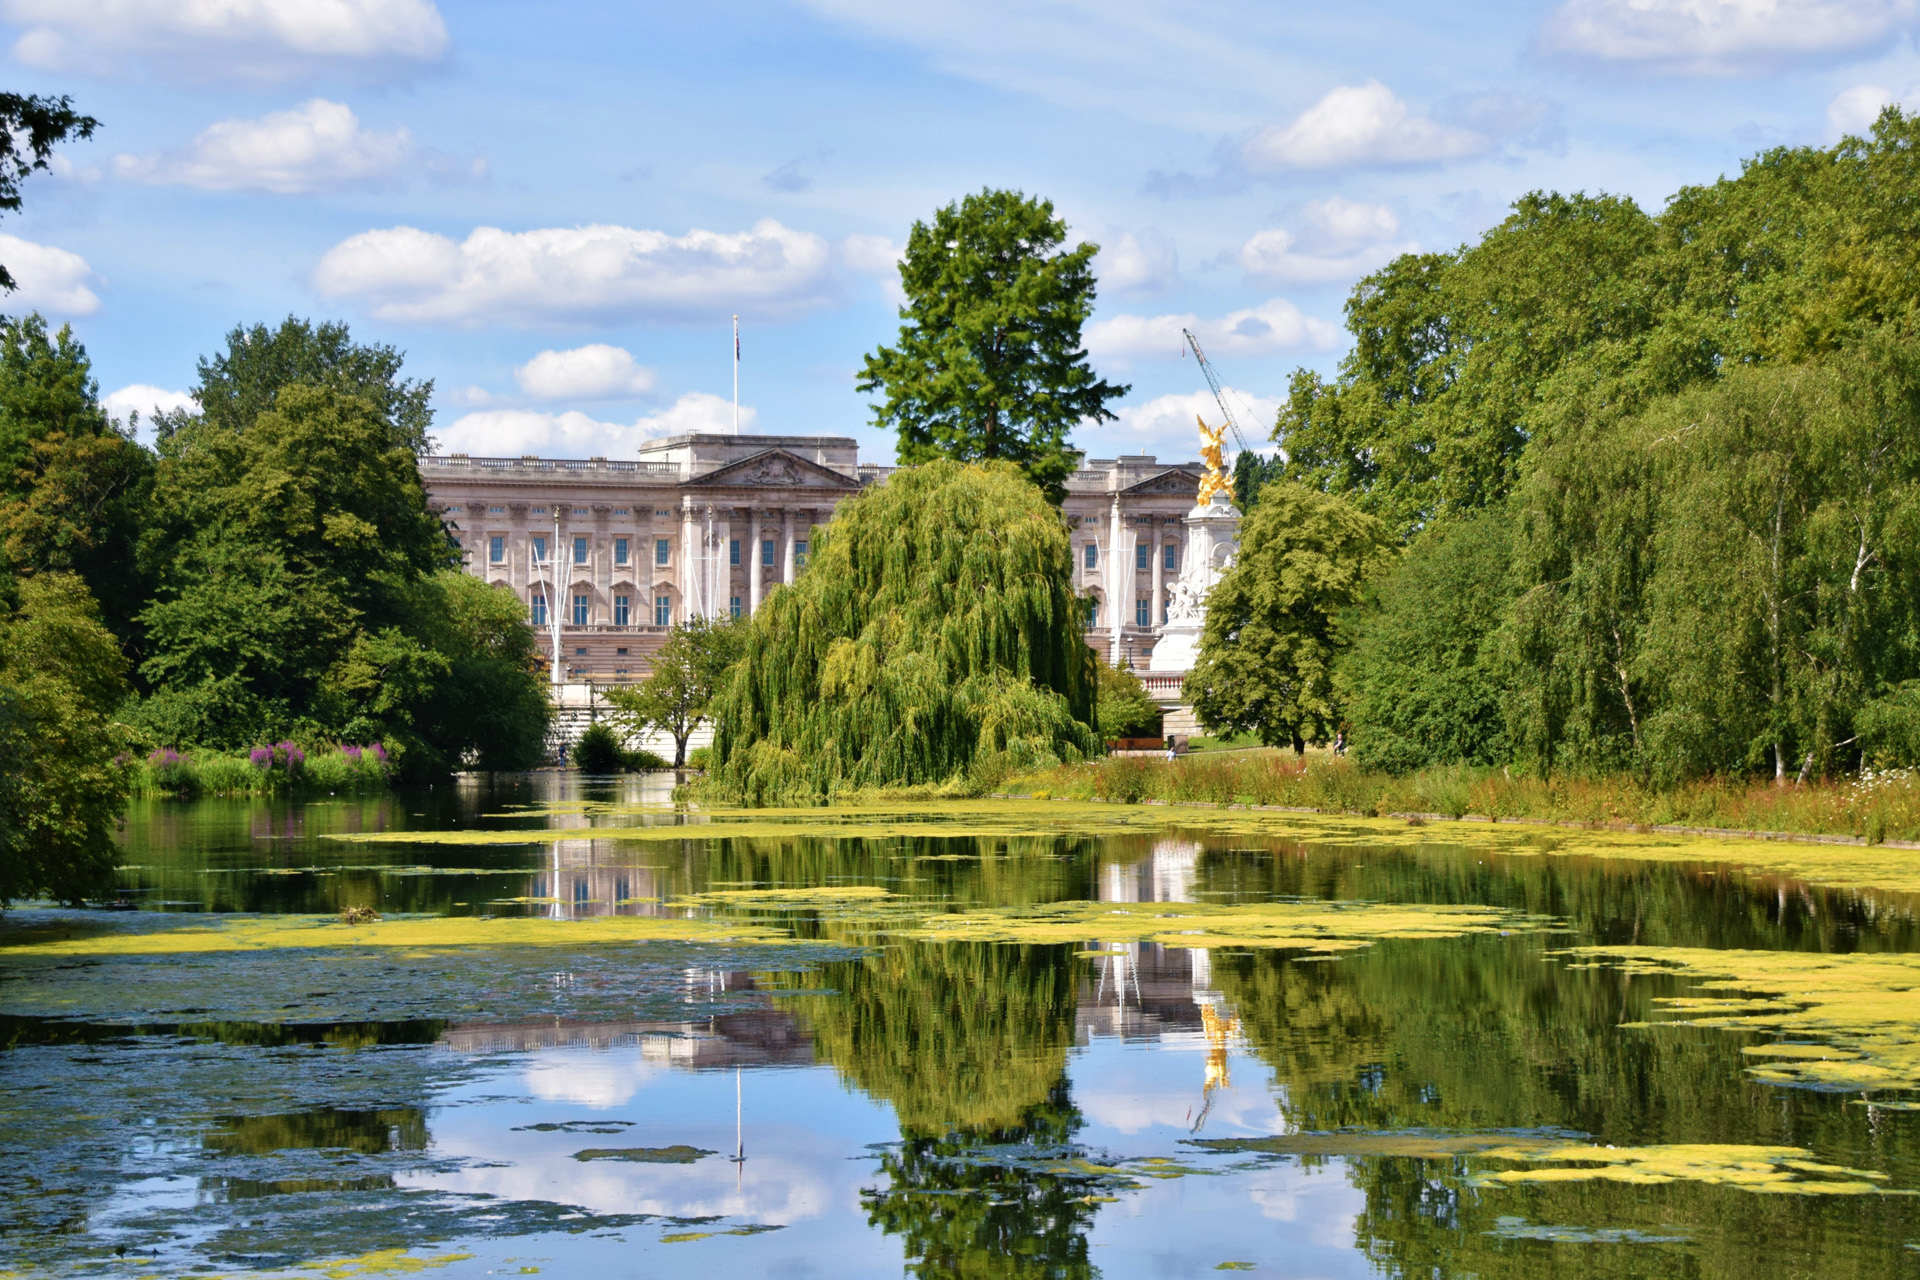 Buckingham Palace view from St James's Park with park lake reflection